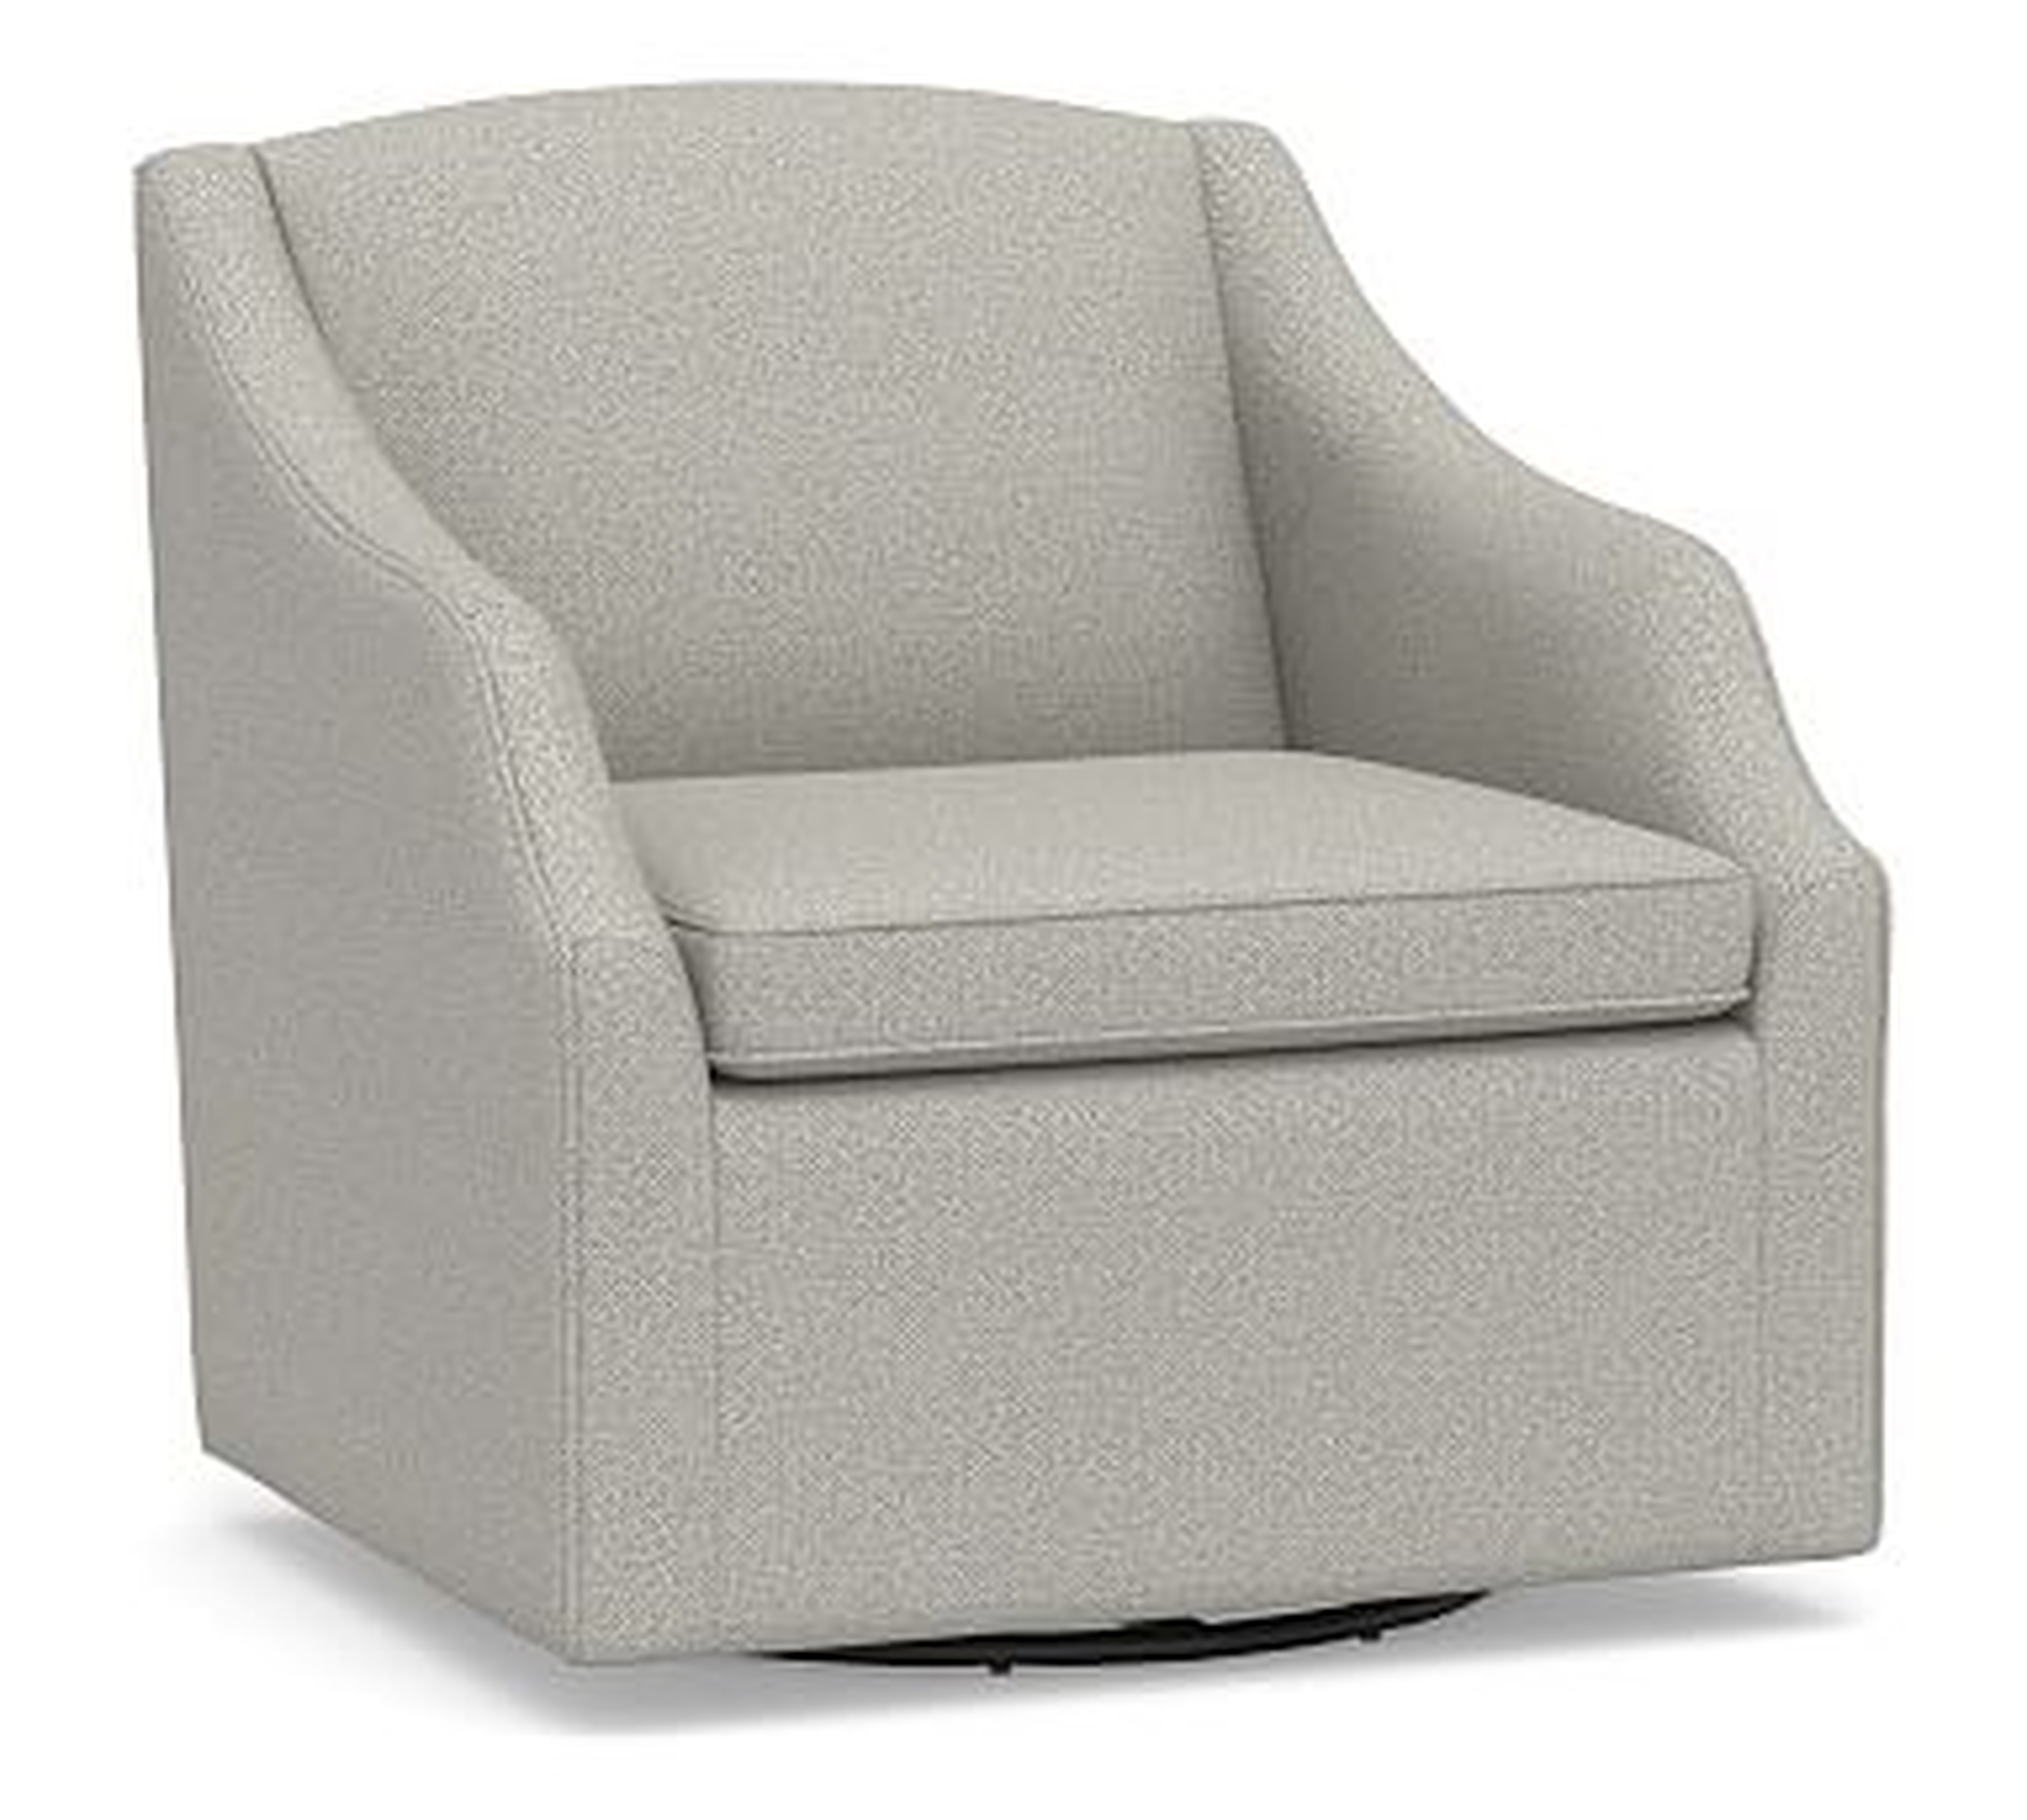 SoMa Emma Upholstered Swivel Armchair, Polyester Wrapped Cushions, Performance Boucle Pebble - Pottery Barn